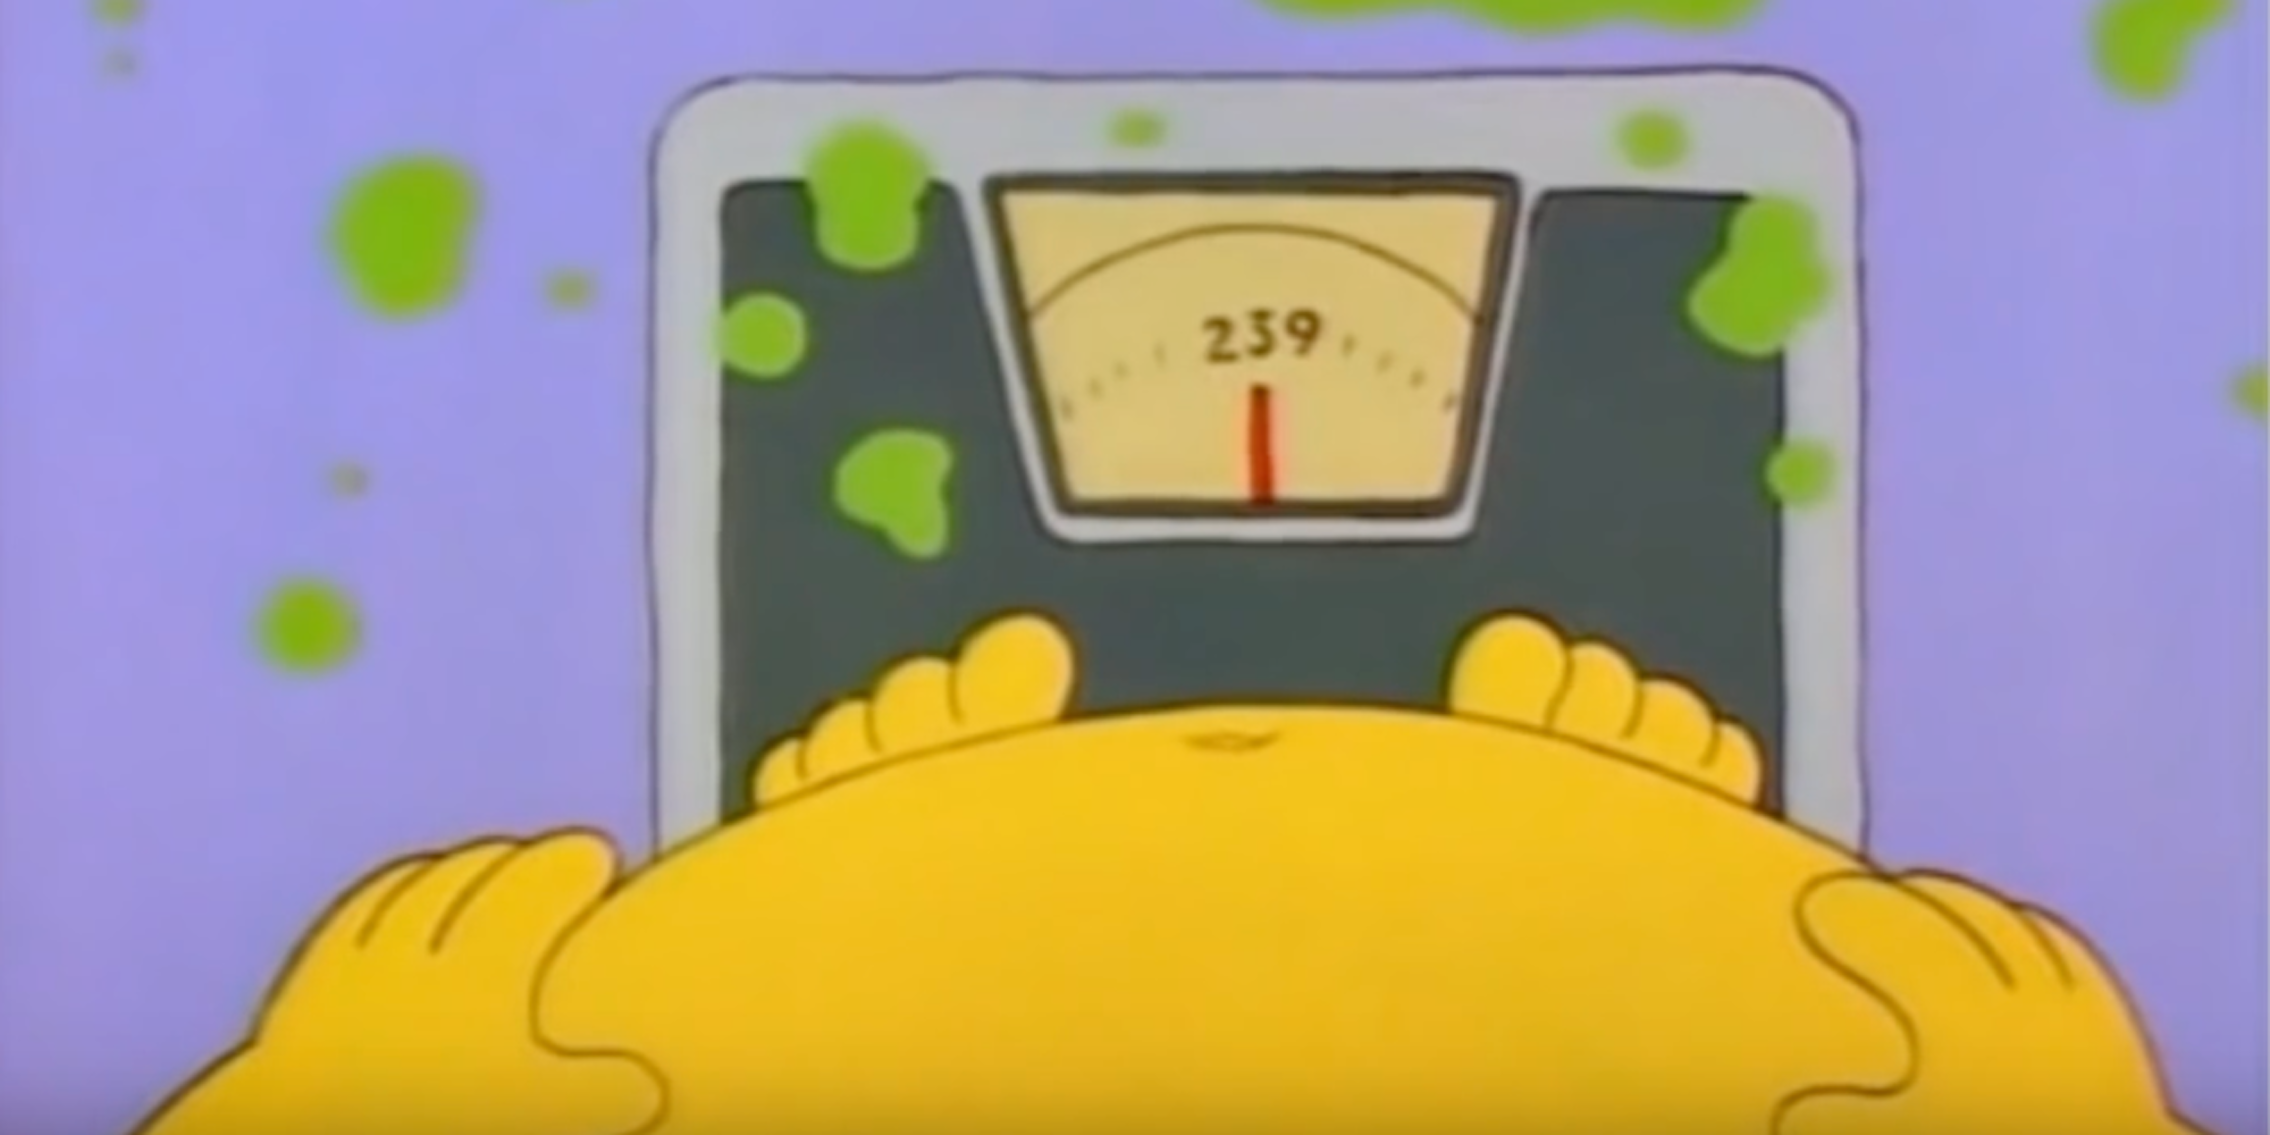 homer simpson 239 lbs predicts trump's weight